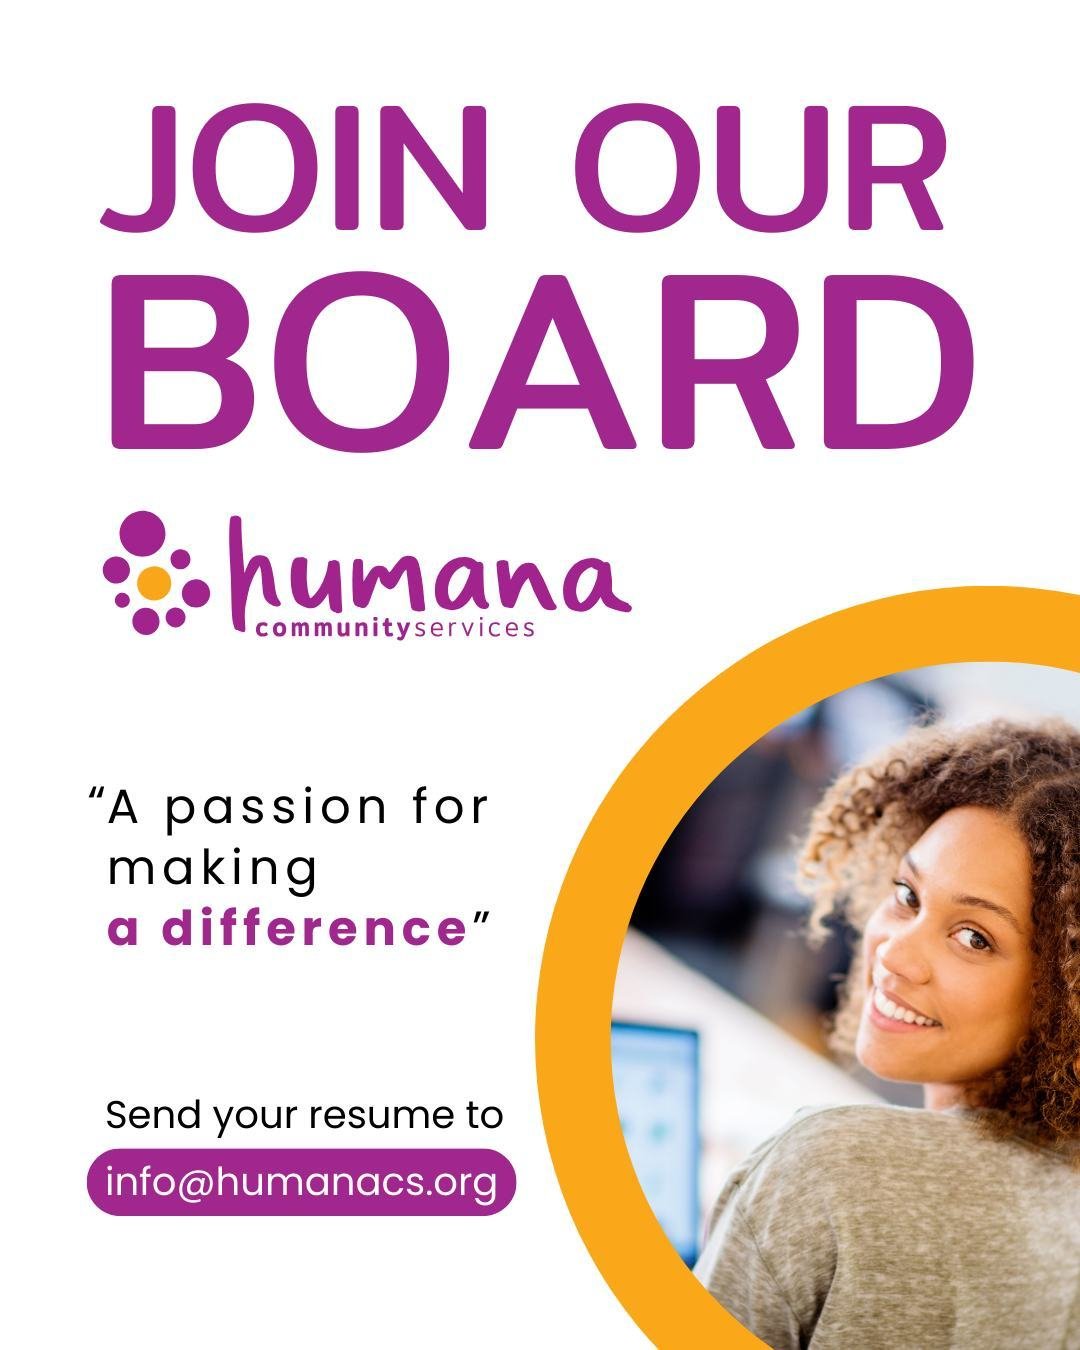 Join Humana's Board of Directors and make a difference in your community!

We look for members who:
✅ Speak from lived experience 
✅ Bring varied skills and perspectives to discussions and decision-making
✅ Are committed to Humana's mission 
✅ Align 